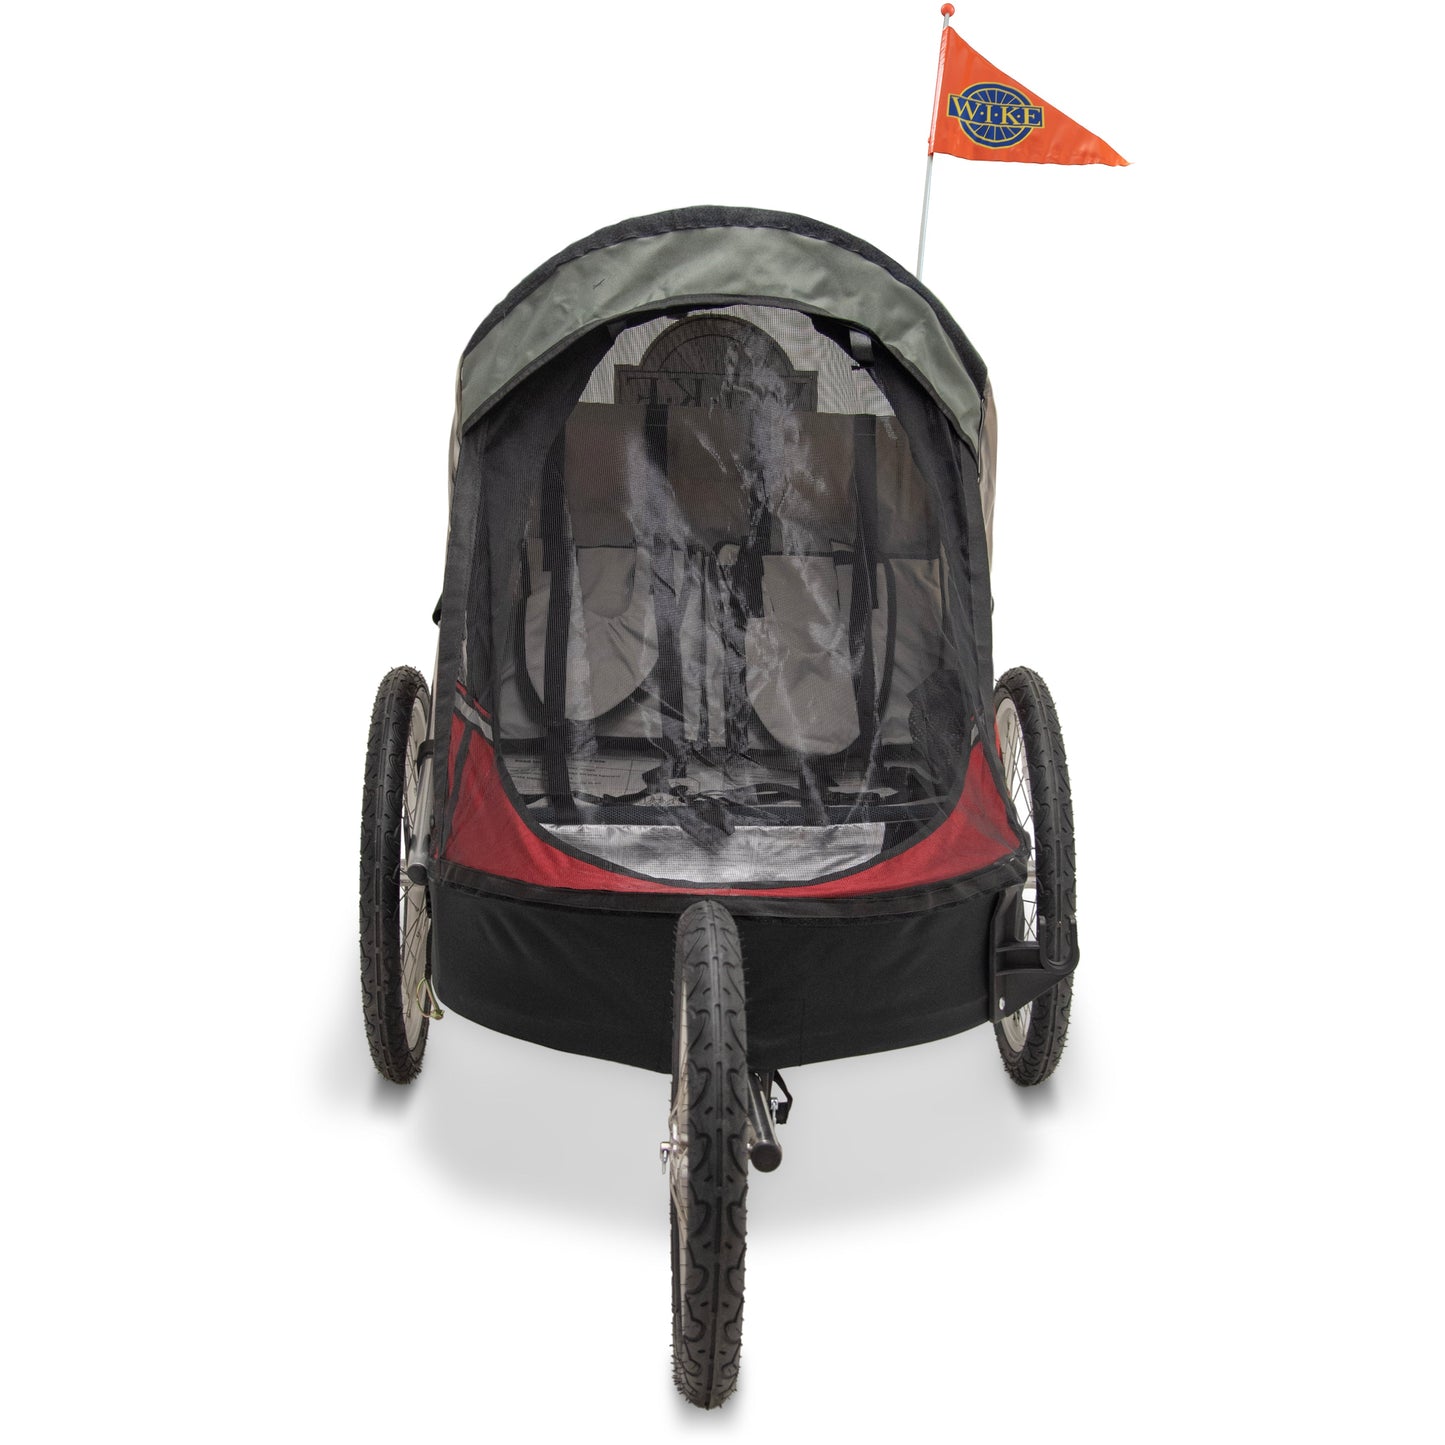 Wike Premium Double Children's Bike Trailer - Includes Stroller and Jogging Kit